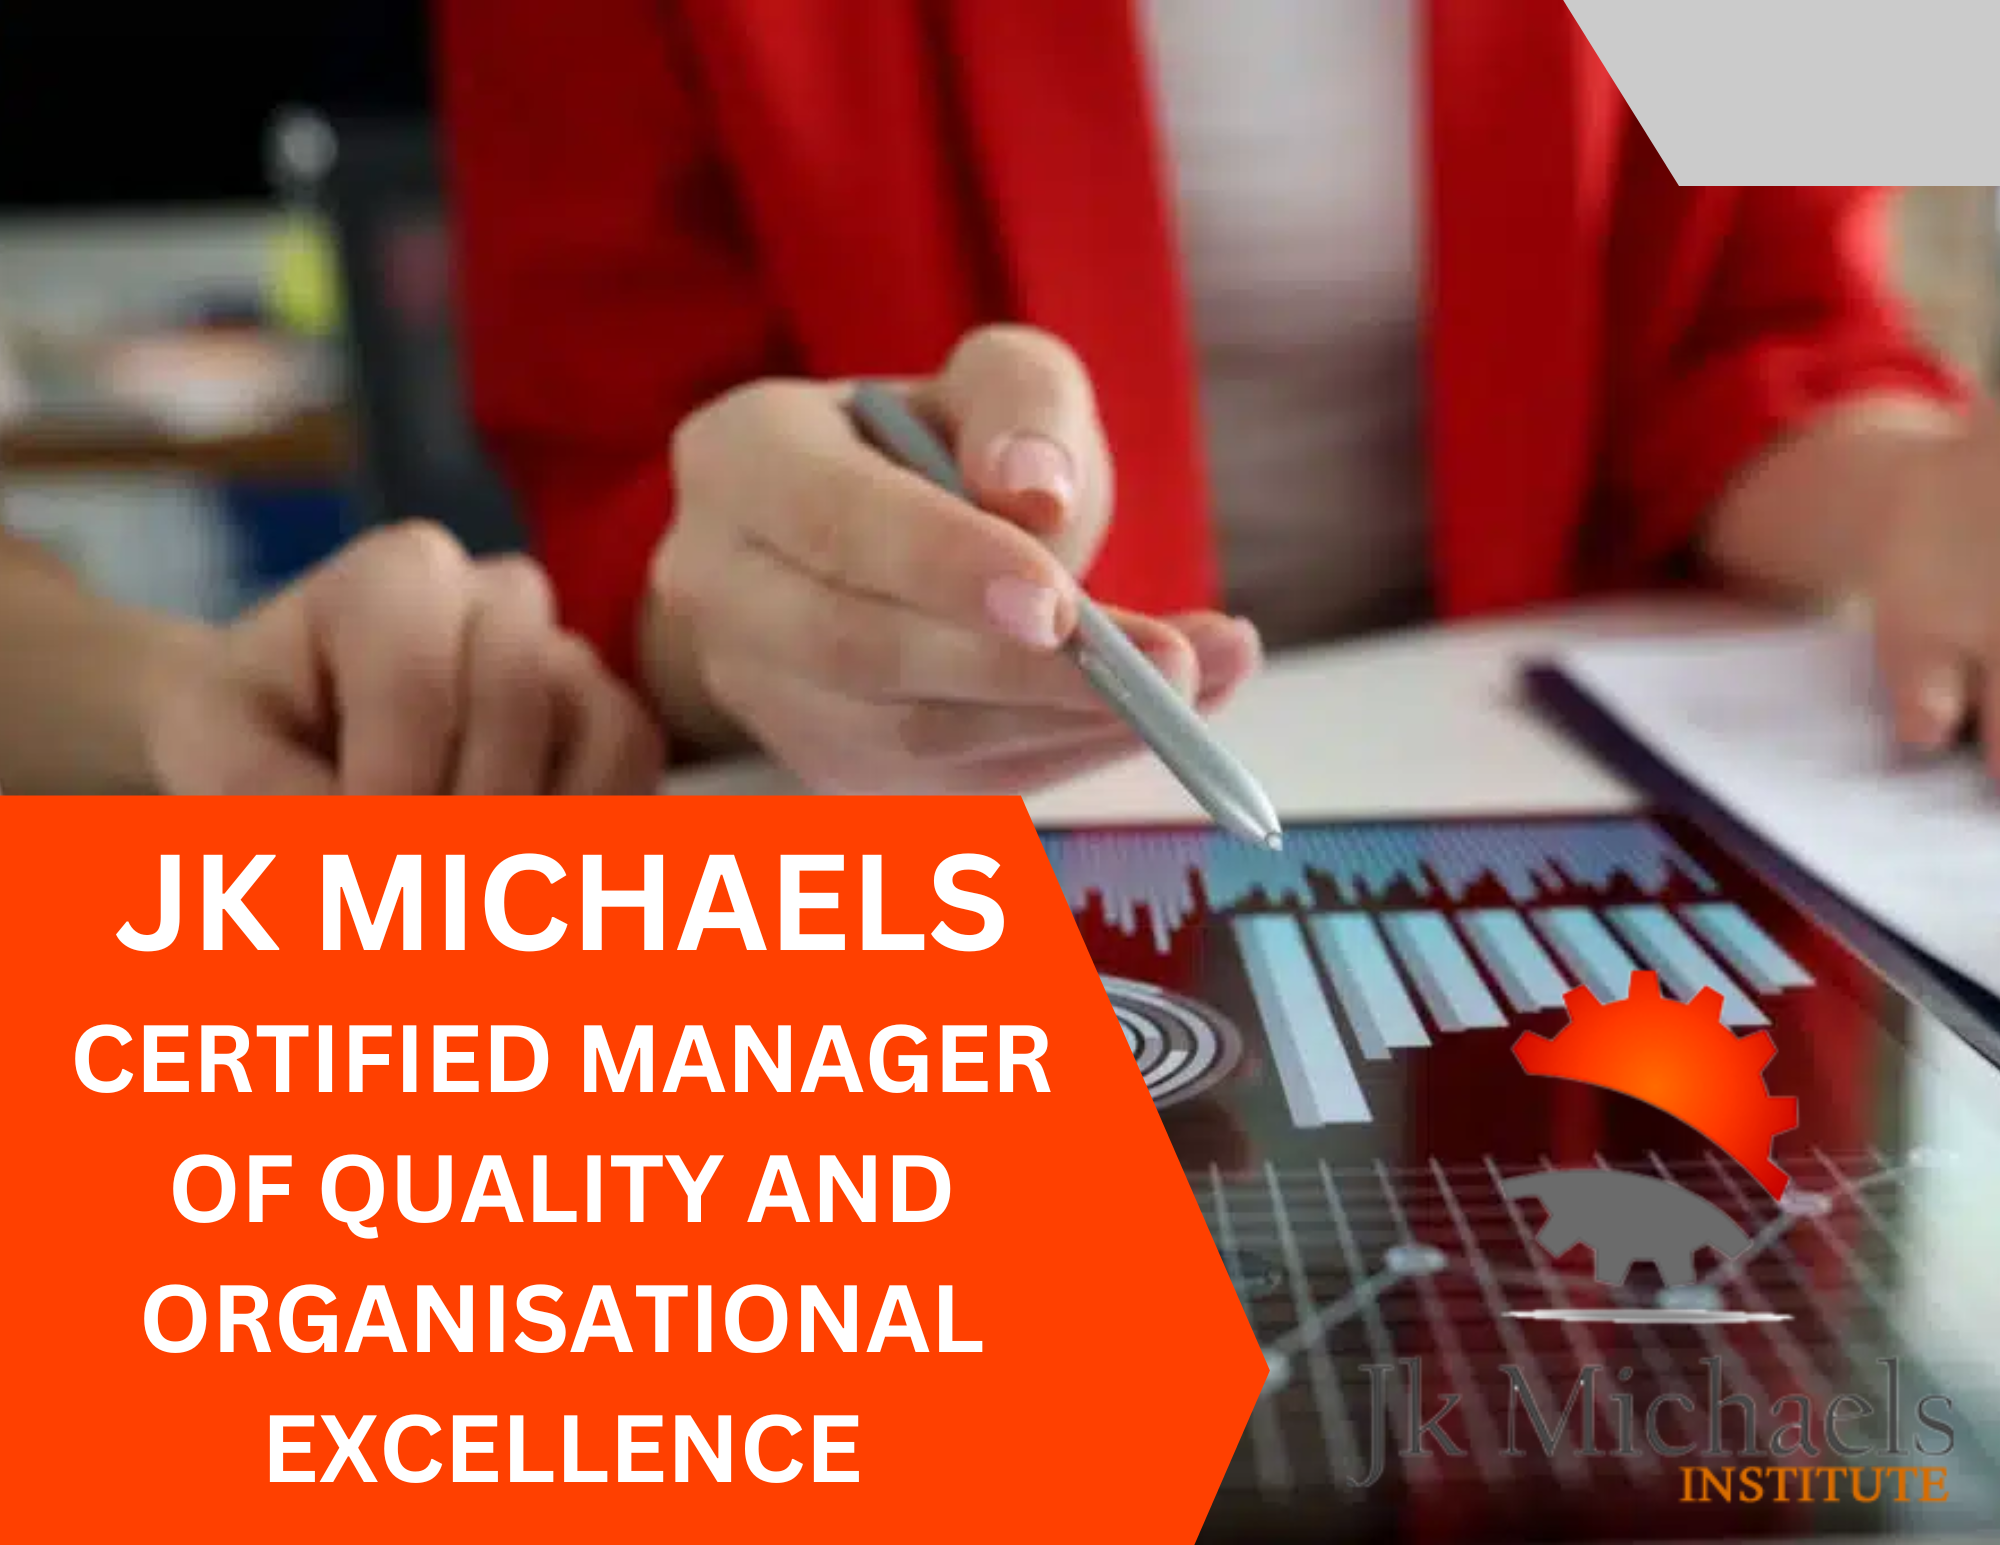 CERTIFIED MANAGER OF QUALITY AND ORGANISATIONAL EXCELLENCE